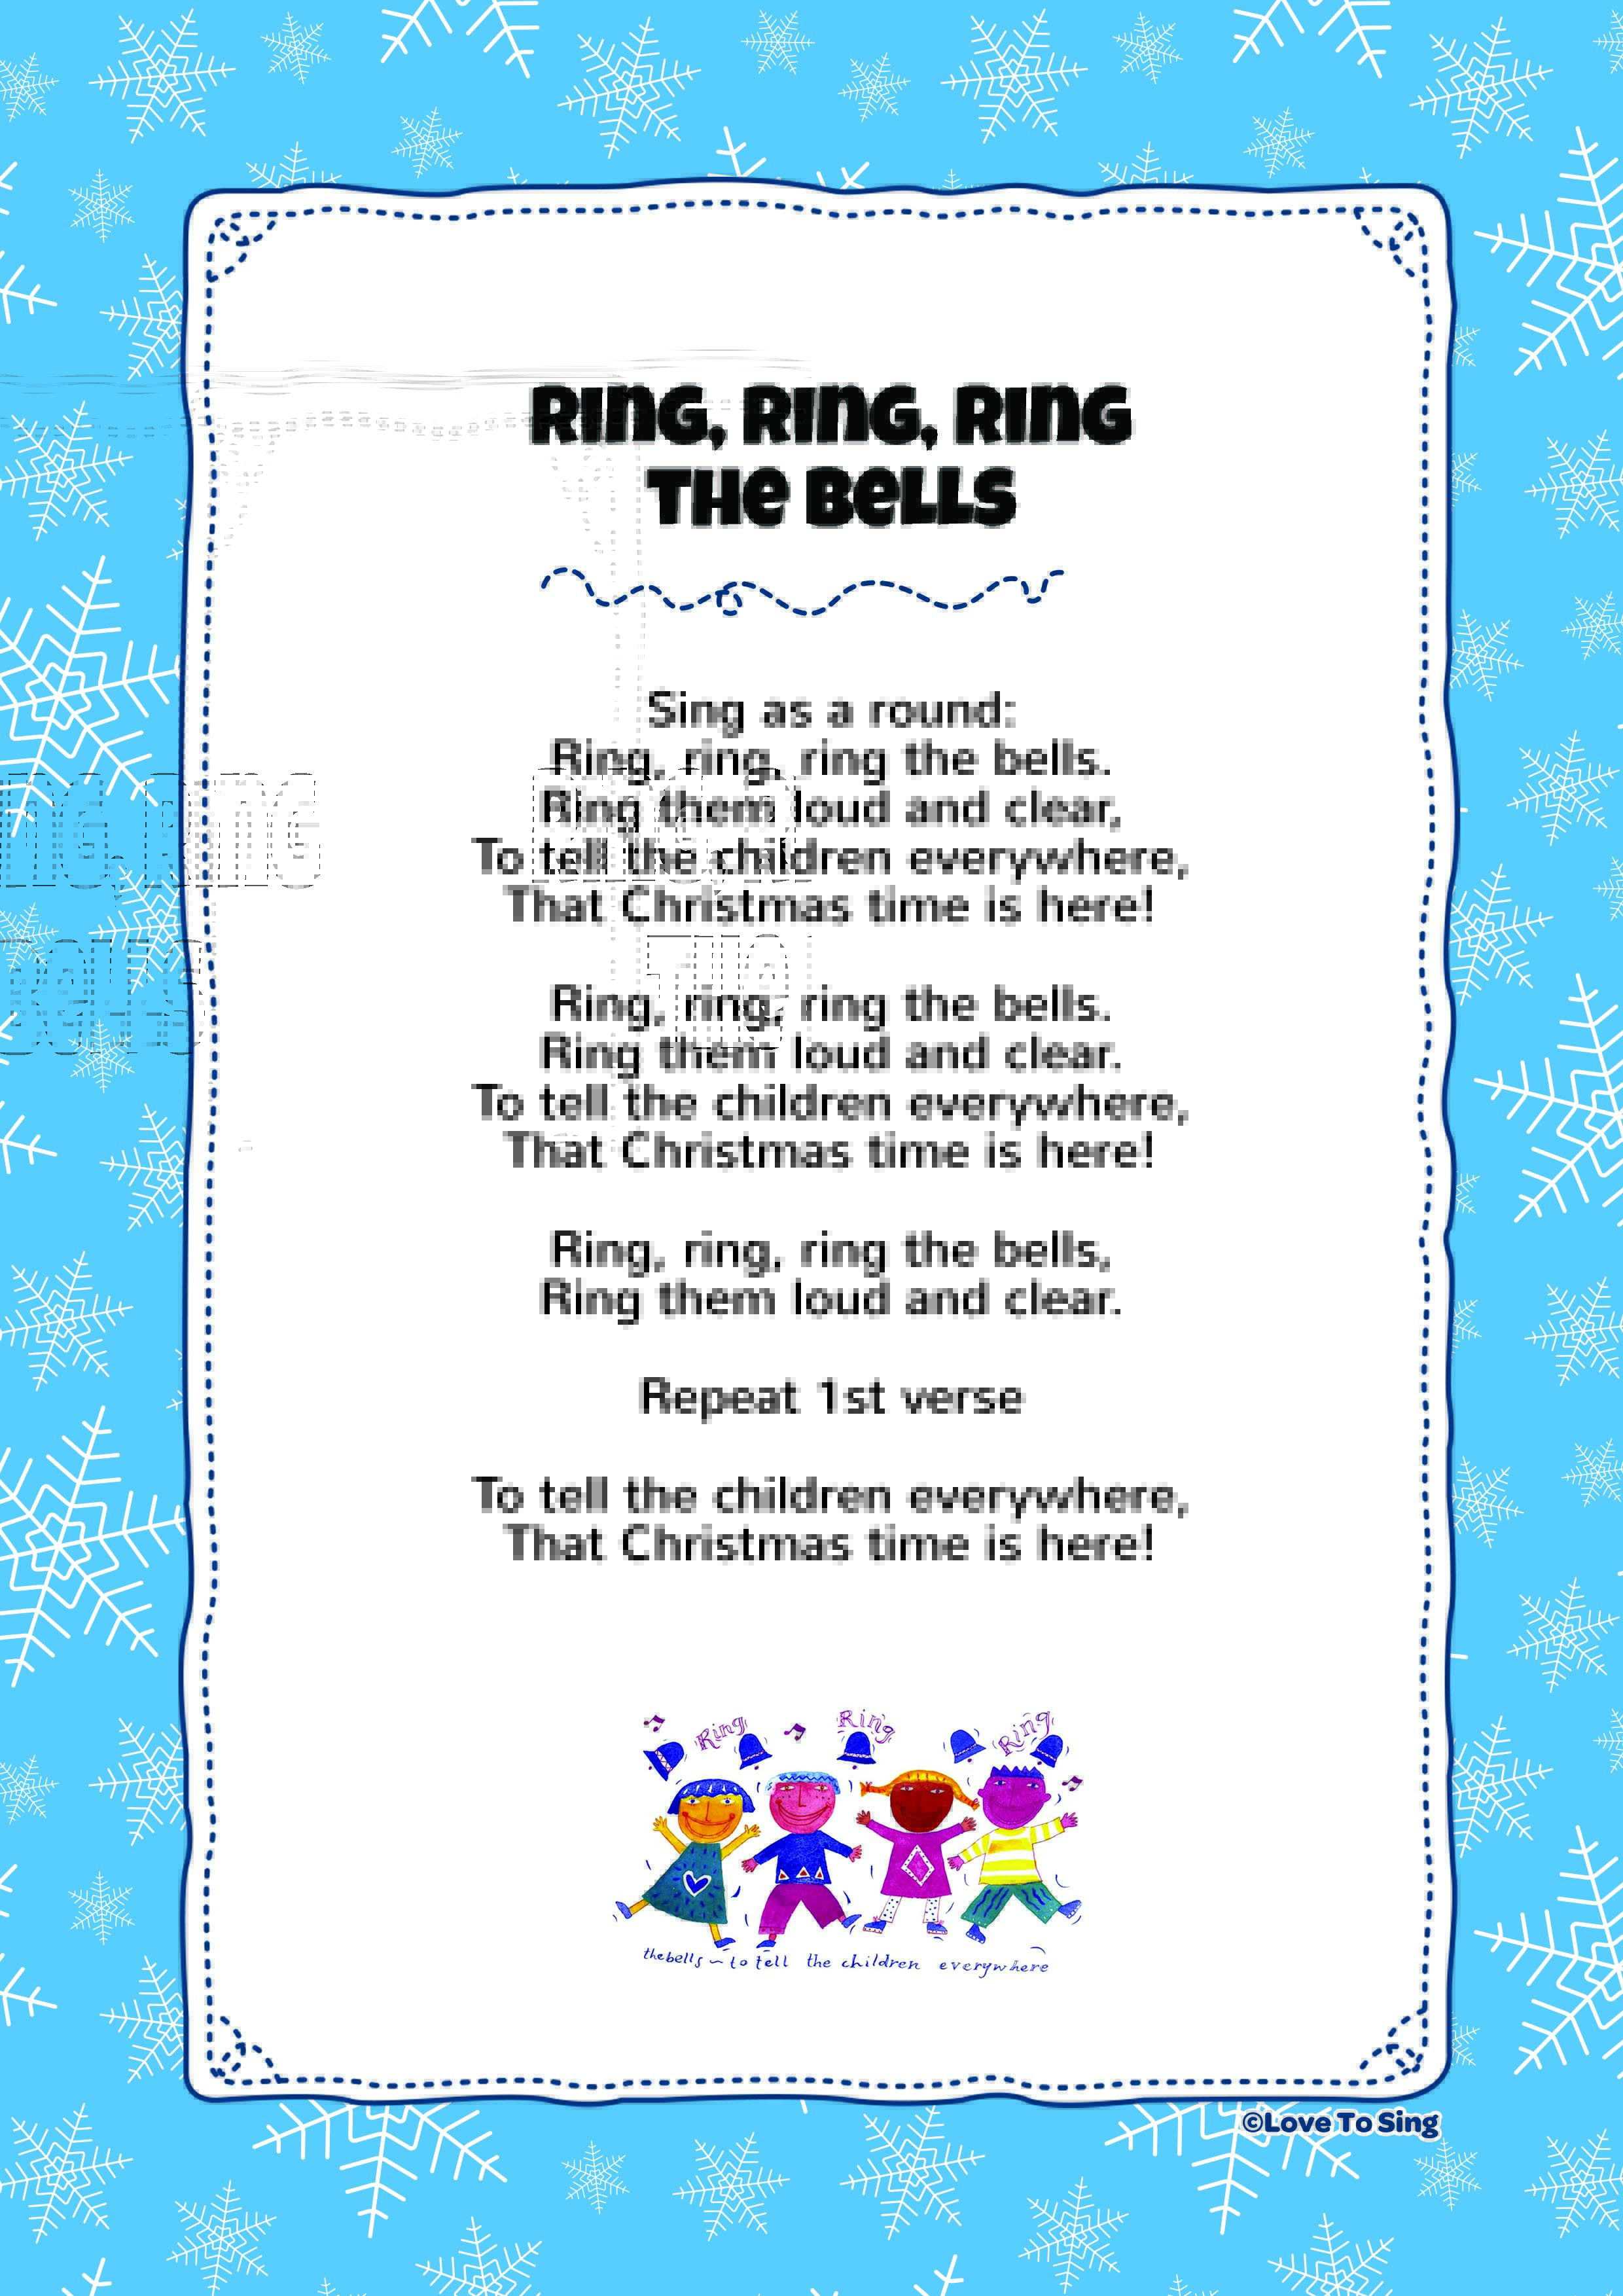 Ring Ring Ring The Bells | Kids Video Song with FREE Lyrics & Activities!